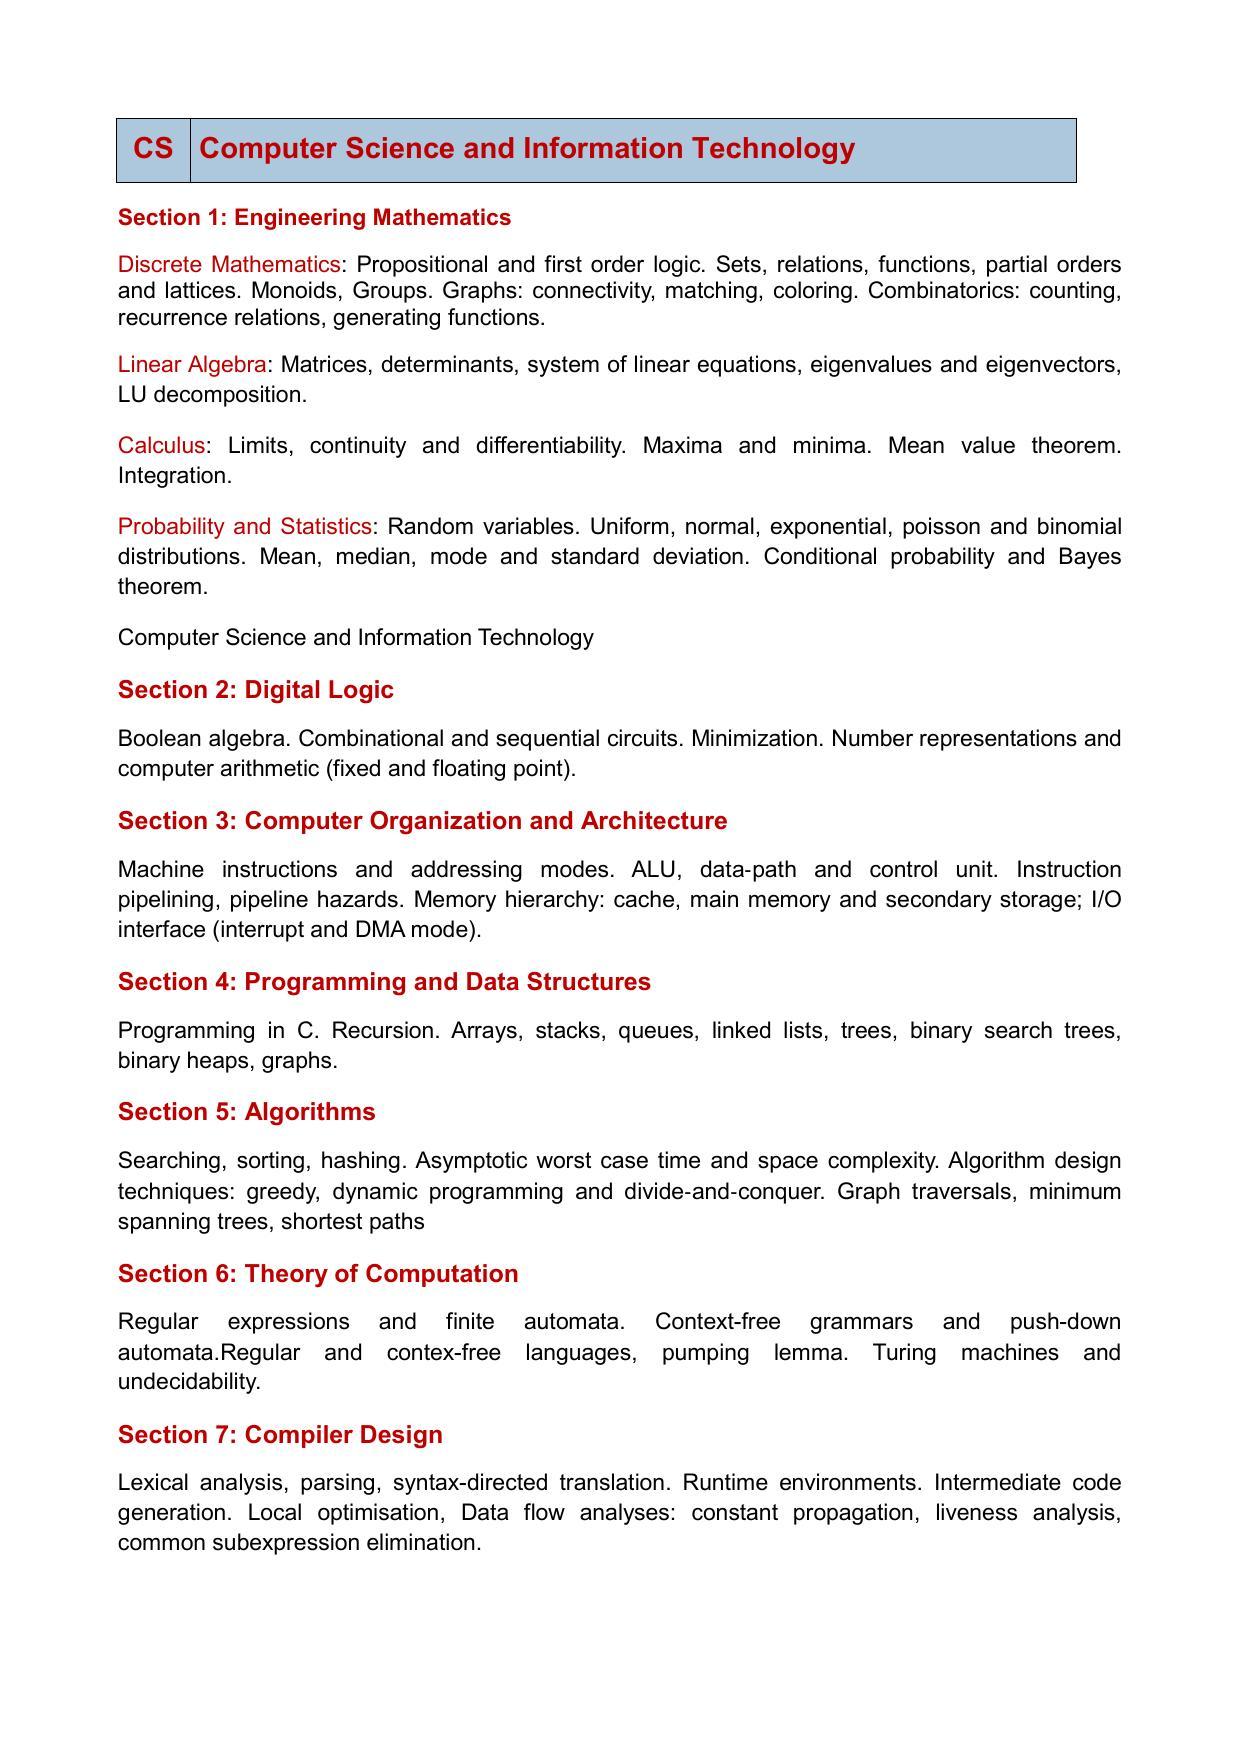 GATE Computer Science and Information Technology Syllabus - Page 1